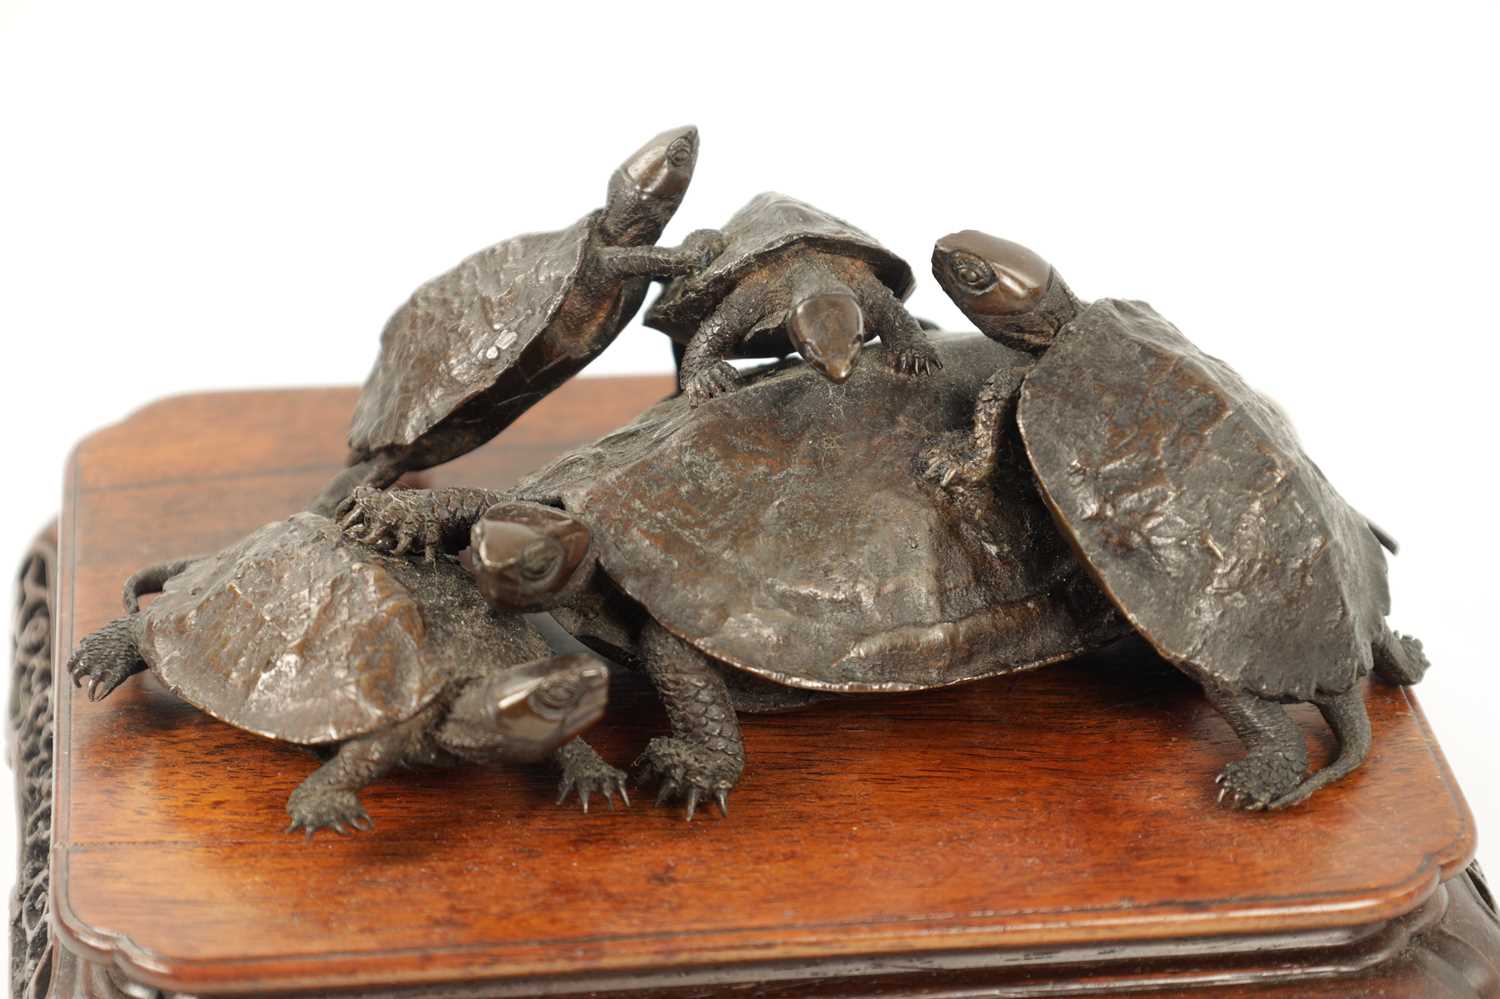 A FINE JAPANESE MEIJI PERIOD BRONZE SCULPTURE OF A GROUP OF TURTLES - Image 4 of 8